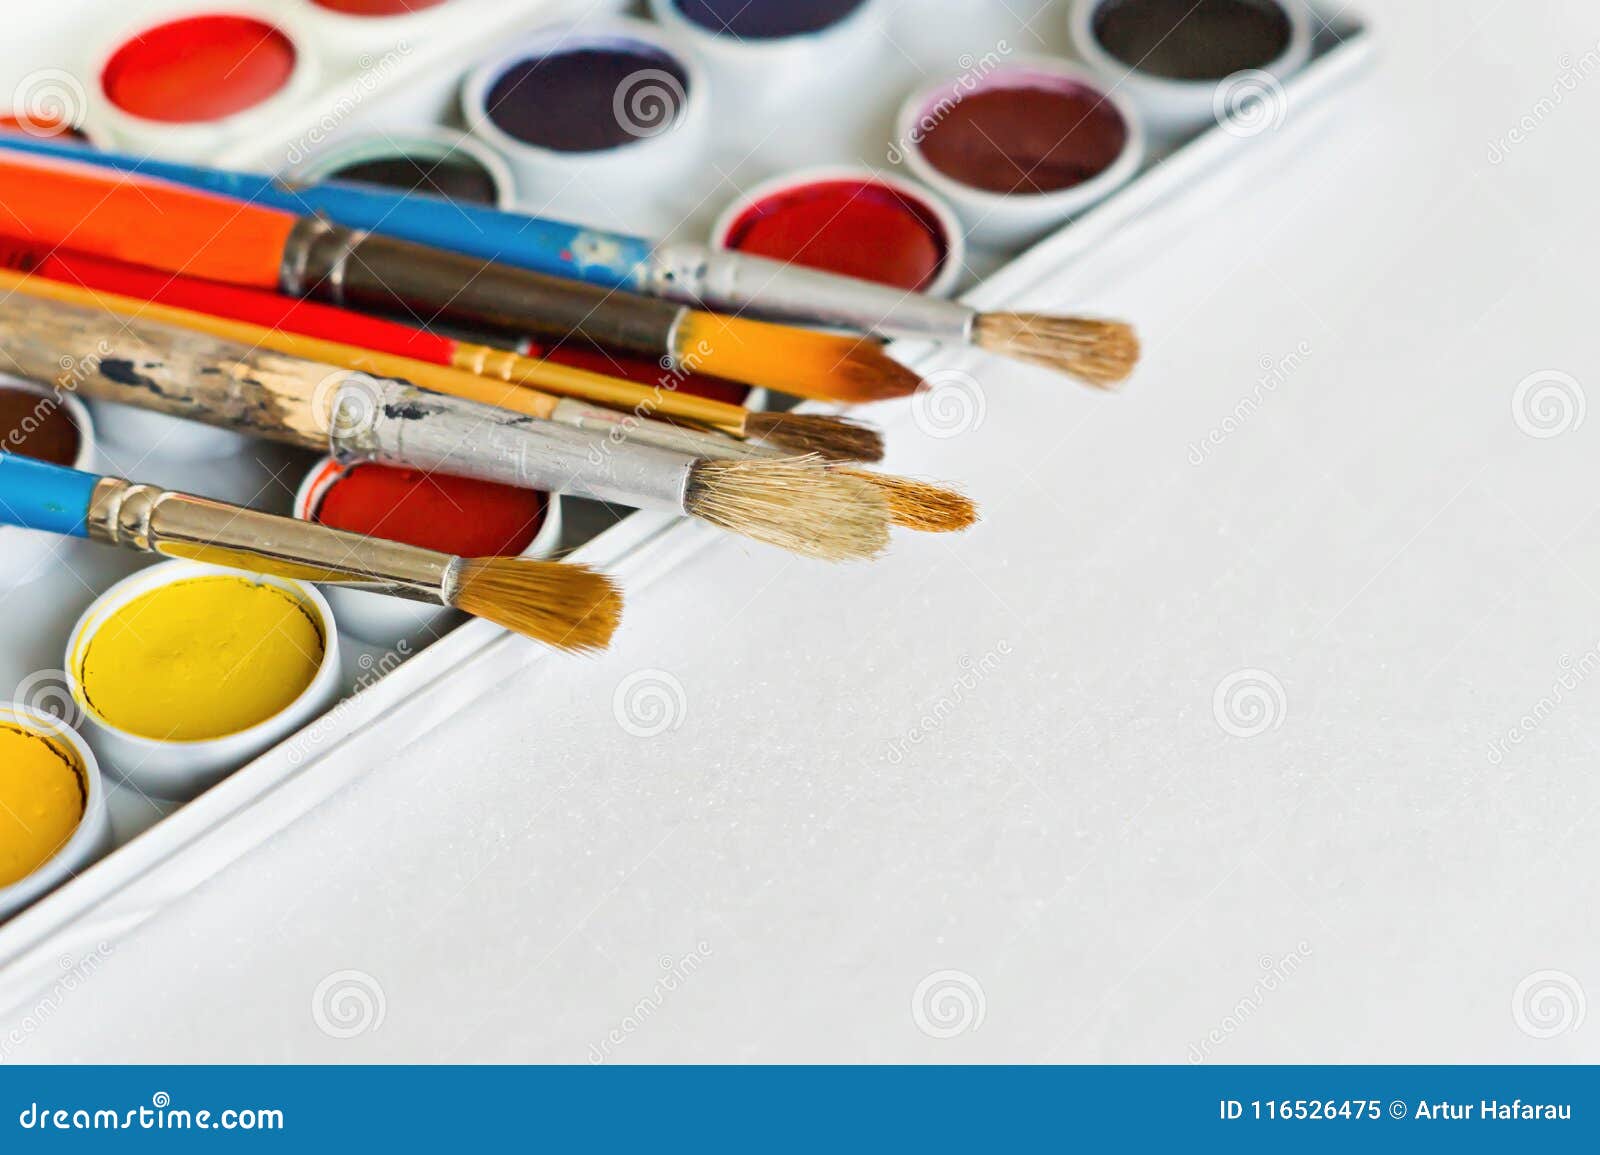 Artist`s Brushes And Paints Isolated On White Background Stock Image ...